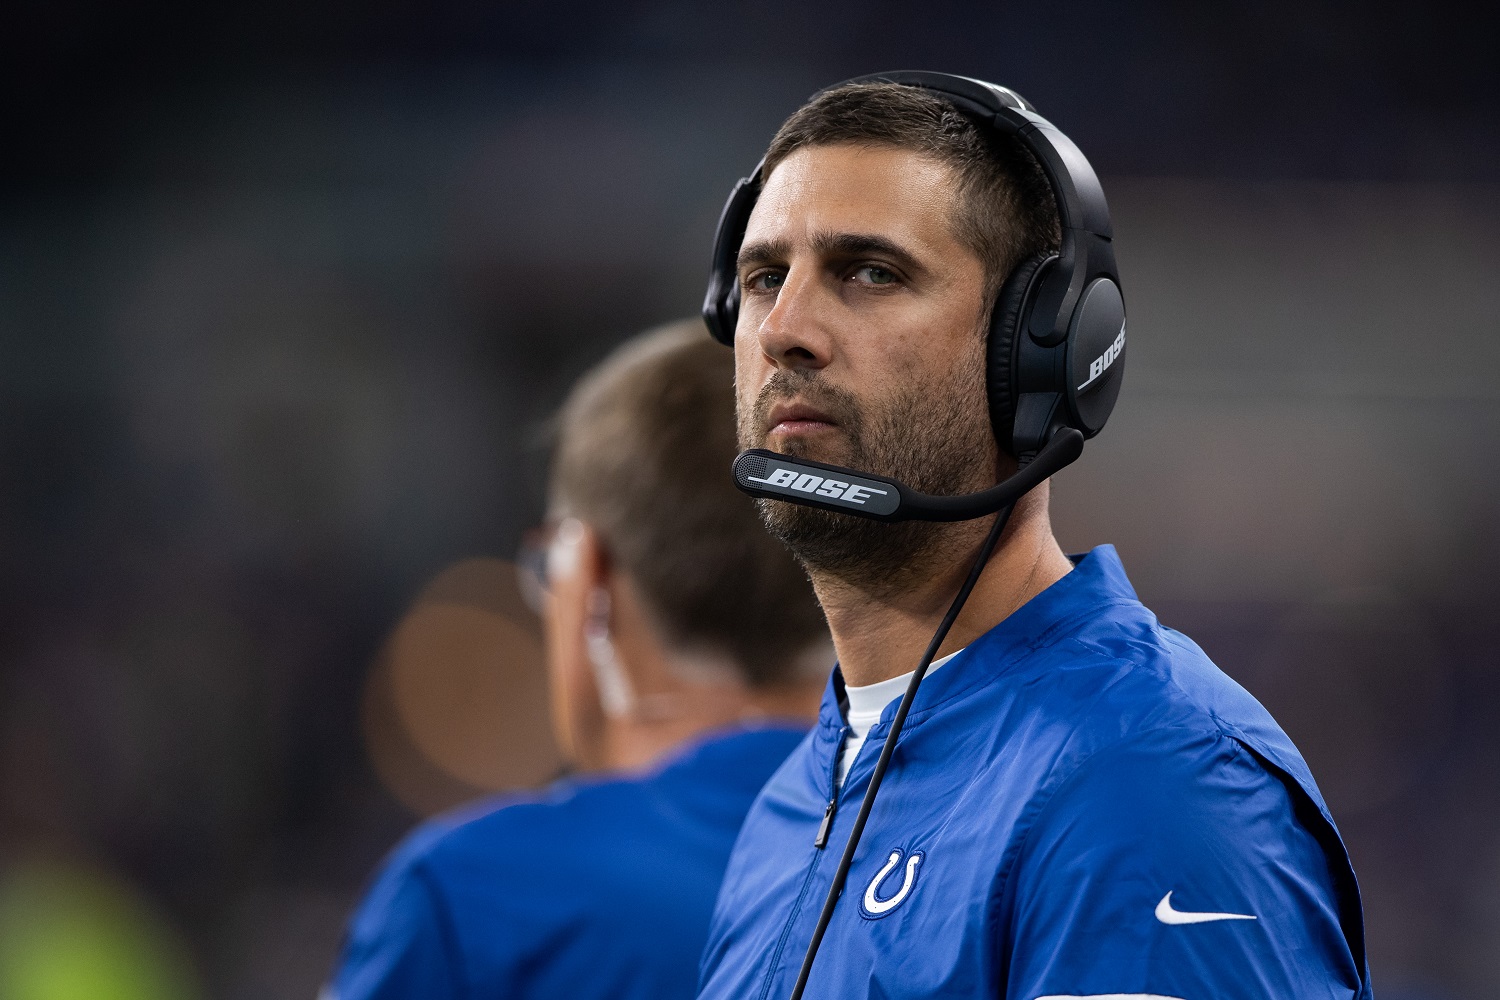 The Philadelphia Eagles hired third-year Indianapolis Colts offensive coordinator Nick Sirianni to replace Doug Pederson as their head coach. | Zach Bolinger/Icon Sportswire via Getty Images